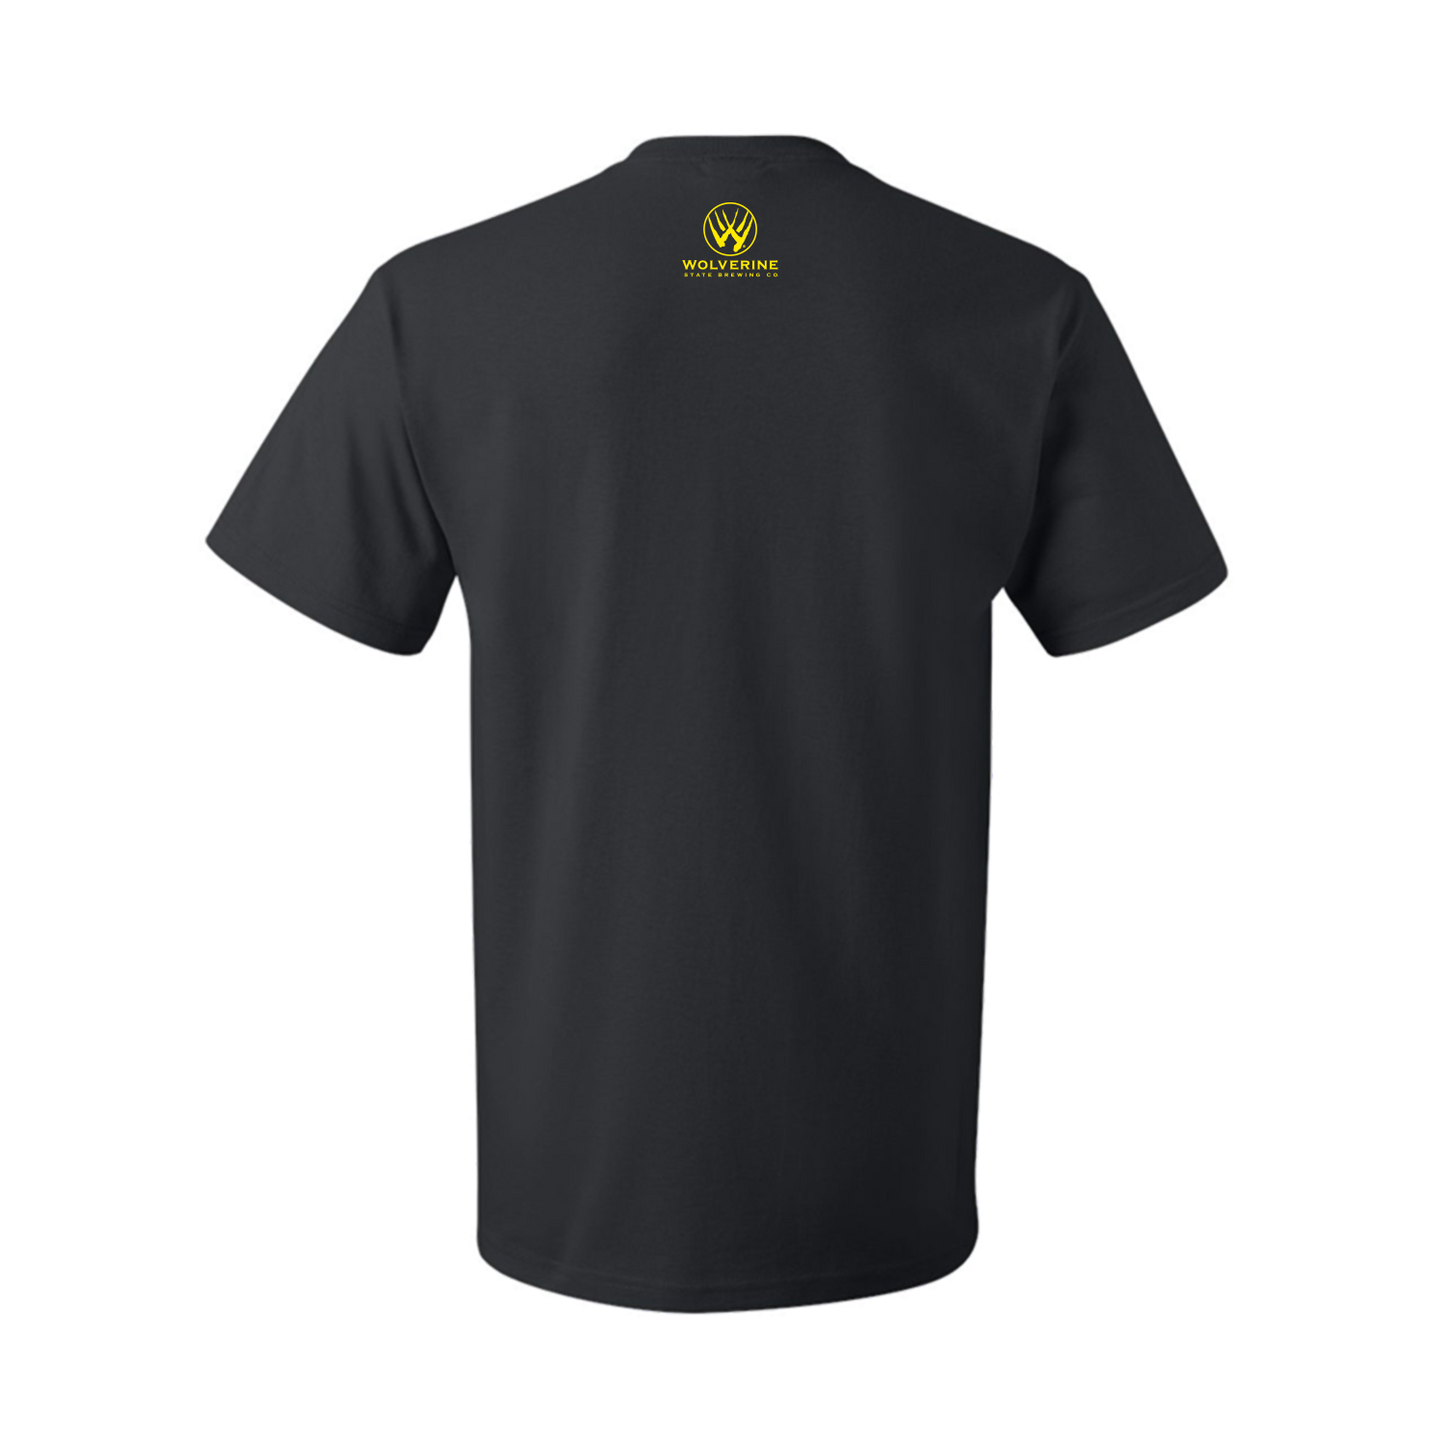 Black Unisex T-shirt with Small Yellow Wolverine Logo on Back Tag